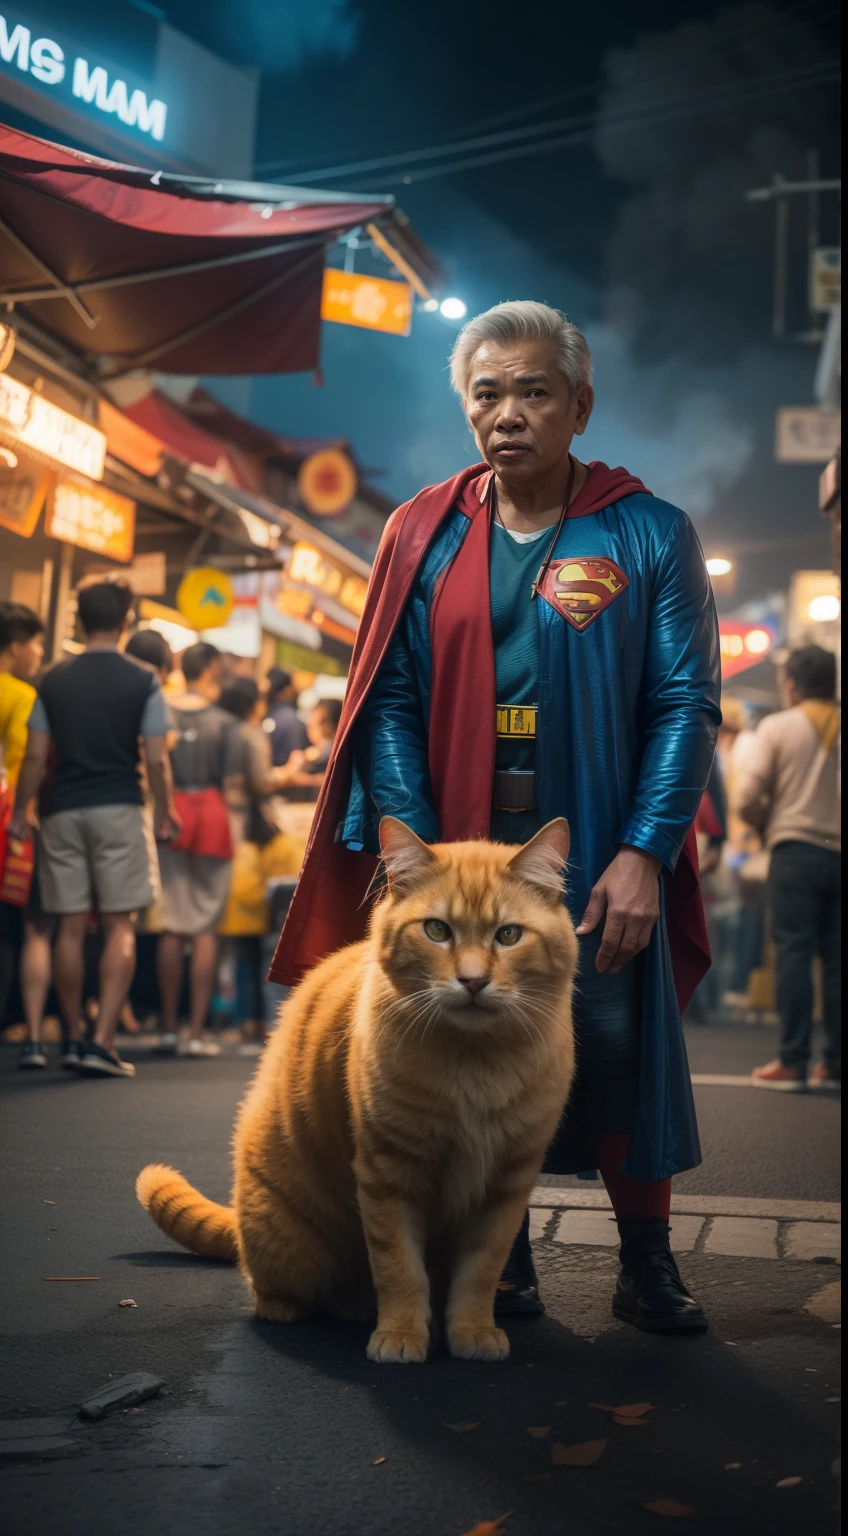 a 70 years old malay man in superman costume outfit standing in front of a bustling crowded 夜晚 market holding a yellow big fluffy cat, 夜晚, 严肃的表情, 夜晚time, 超人电影风格, 超现实主义摄影, 戏剧效果, 背景中有烟雾效果, 深色分级, 全身, 8千, 特写, 极近距离照片